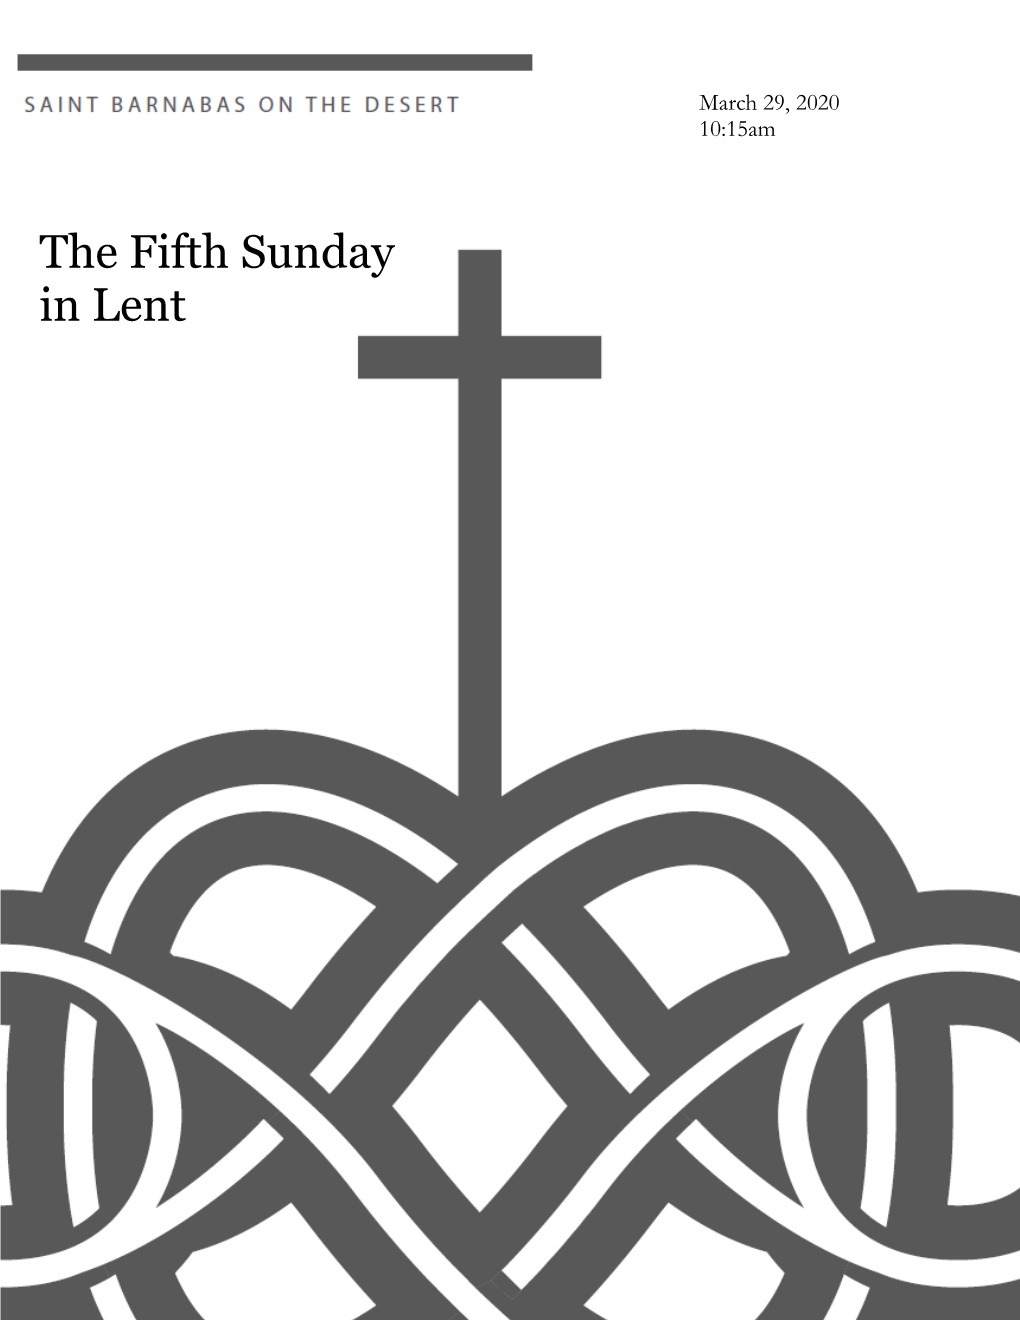 The Fifth Sunday in Lent